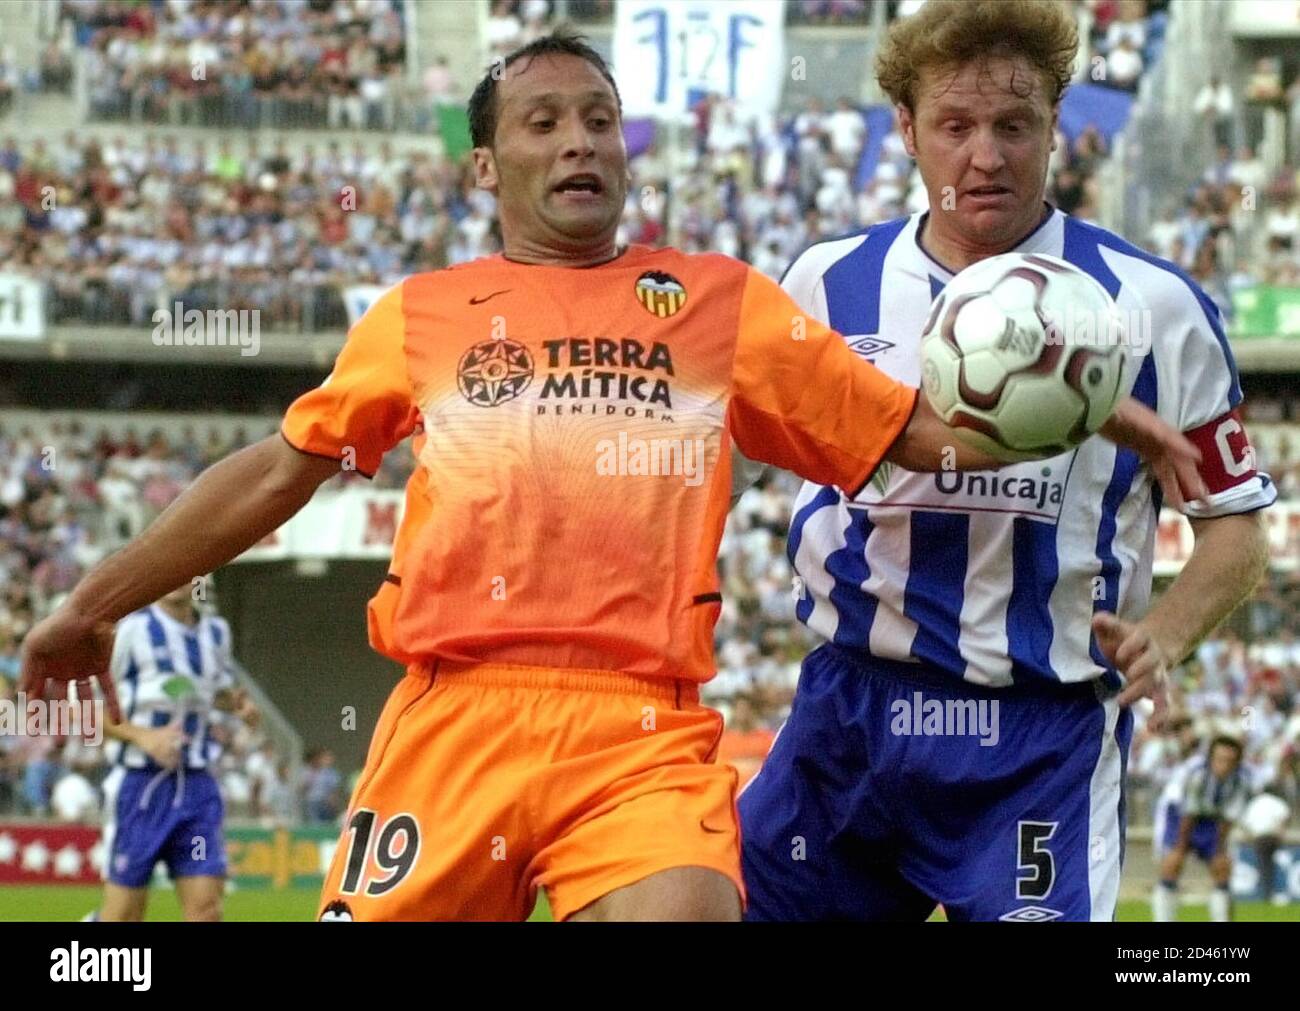 Malaga's Miguel Angel Roteta (R) and Valencia's Francisco Rufete try to  control the ball during their First Division soccer match at Malaga's La  Rosaleda stadium, on September 22, 2002. The match finished